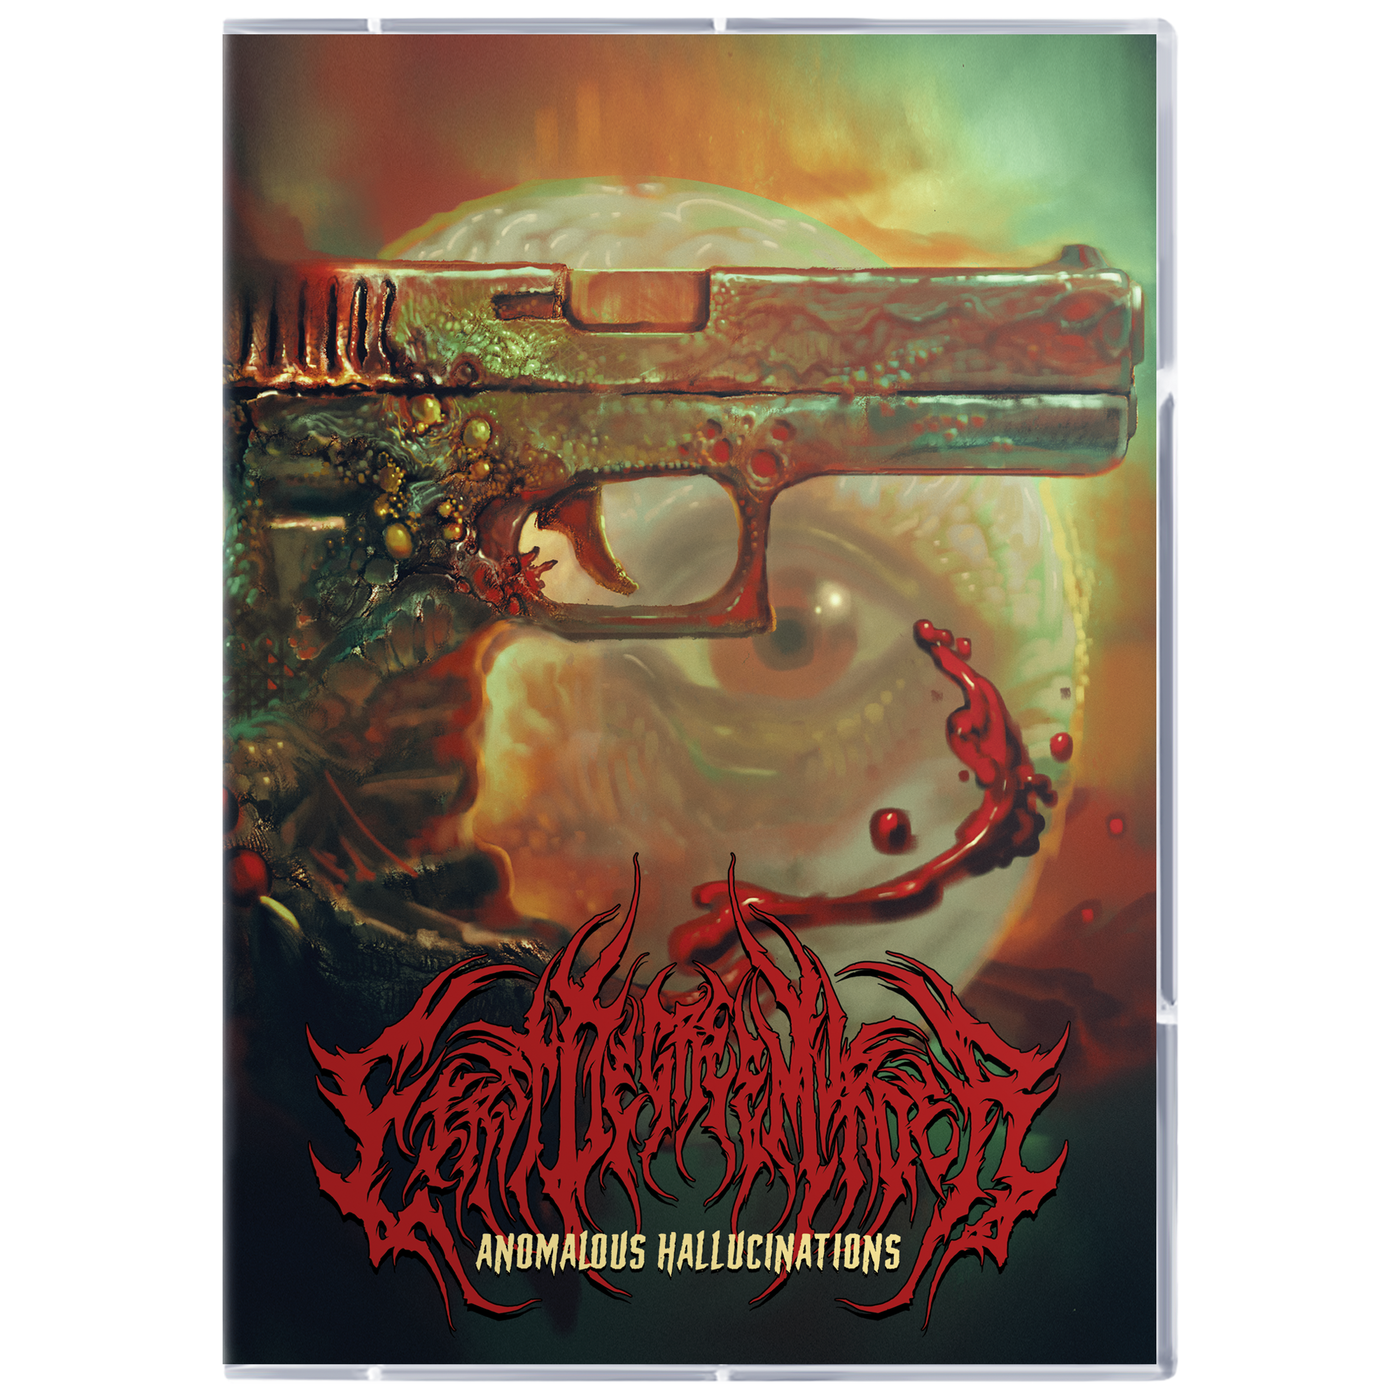 First Degree Murder 'Anomalous Hallucinations' Collector's Edition